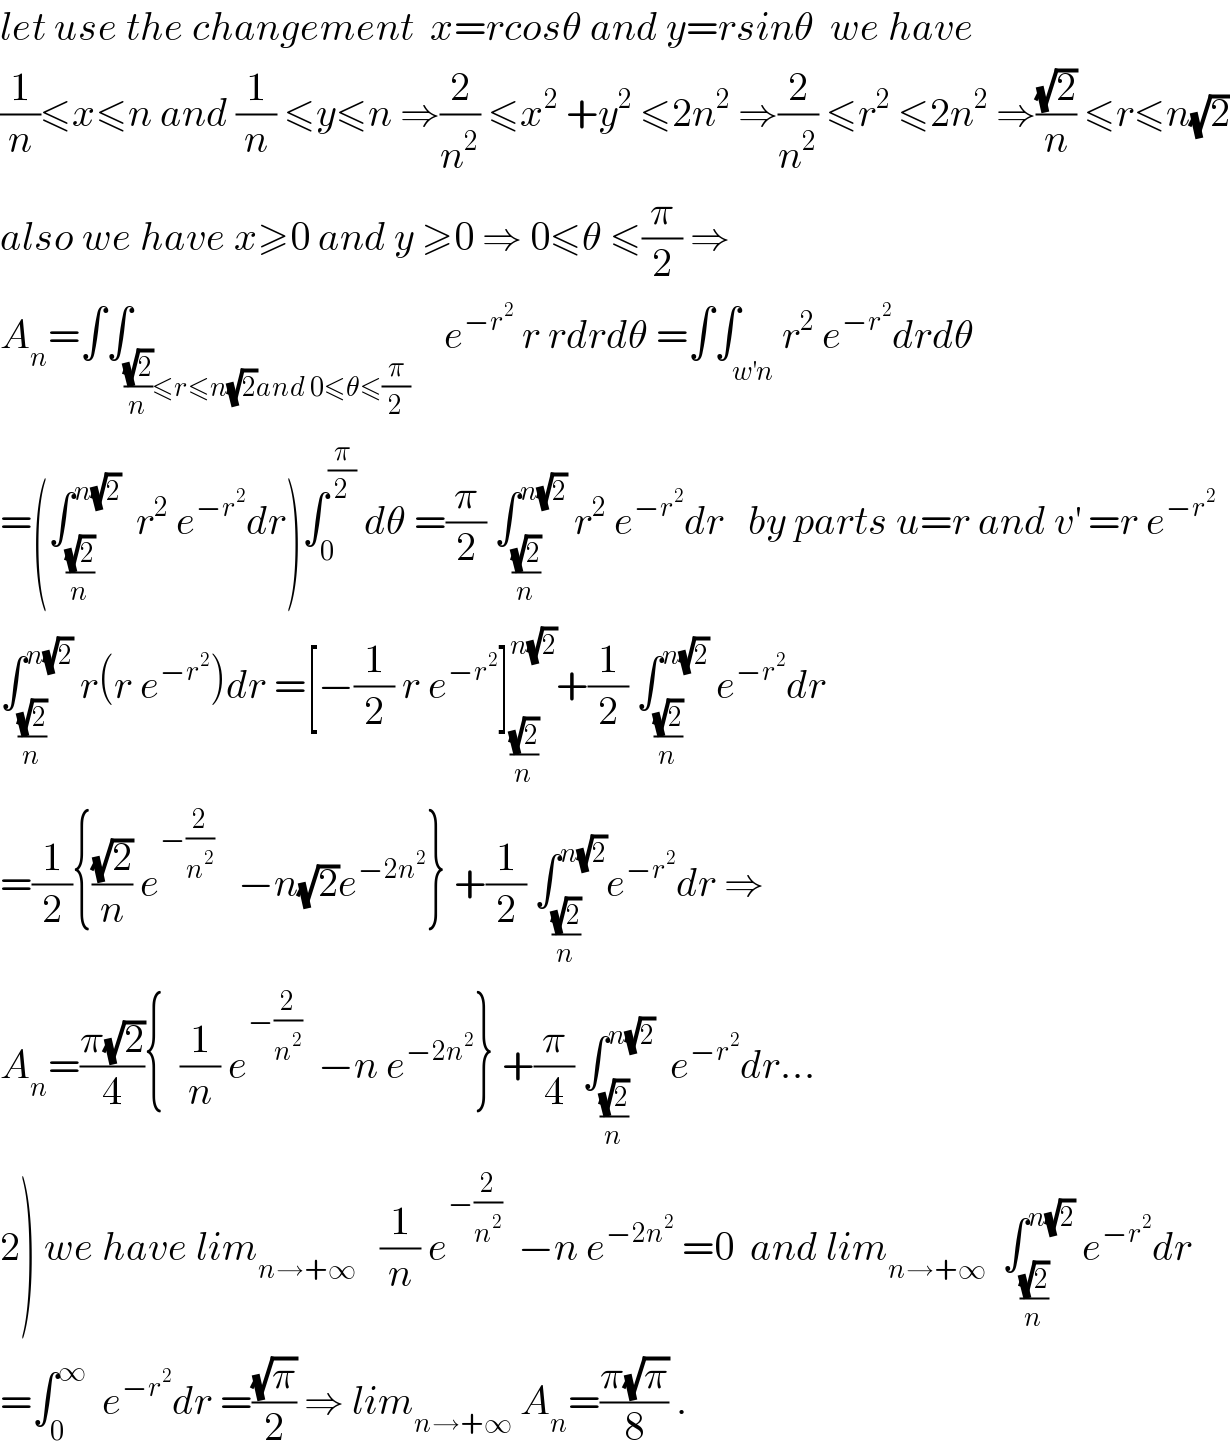 let use the changement  x=rcosθ and y=rsinθ  we have  (1/n)≤x≤n and (1/n) ≤y≤n ⇒(2/n^2 ) ≤x^2  +y^2  ≤2n^2  ⇒(2/n^2 ) ≤r^2  ≤2n^2  ⇒((√2)/n) ≤r≤n(√2)  also we have x≥0 and y ≥0 ⇒ 0≤θ ≤(π/2) ⇒  A_n =∫∫_(((√2)/n)≤r≤n(√2)and 0≤θ≤(π/2))    e^(−r^2 )  r rdrdθ =∫∫_(w^′ n) r^2  e^(−r^2 ) drdθ  =(∫_((√2)/n) ^(n(√2))   r^2  e^(−r^2 ) dr)∫_0 ^(π/2)  dθ =(π/2) ∫_((√2)/n) ^(n(√2))  r^2  e^(−r^2 ) dr   by parts u=r and v^′  =r e^(−r^2 )   ∫_((√2)/n) ^(n(√2))  r(r e^(−r^2 ) )dr =[−(1/2) r e^(−r^2 ) ]_((√2)/n) ^(n(√2)) +(1/2) ∫_((√2)/n) ^(n(√2))  e^(−r^2 ) dr  =(1/2){((√2)/n) e^(−(2/n^2 ))    −n(√2)e^(−2n^2 ) } +(1/2) ∫_((√2)/n) ^(n(√2)) e^(−r^2 ) dr ⇒  A_n =((π(√2))/4){  (1/n) e^(−(2/n^2 ))   −n e^(−2n^2 ) } +(π/4) ∫_((√2)/n) ^(n(√2))   e^(−r^2 ) dr...  2) we have lim_(n→+∞)    (1/n) e^(−(2/n^2 ))   −n e^(−2n^2 )  =0  and lim_(n→+∞)   ∫_((√2)/n) ^(n(√2))  e^(−r^2 ) dr  =∫_0 ^∞   e^(−r^2 ) dr =((√π)/2) ⇒ lim_(n→+∞)  A_n =((π(√π))/8) .  